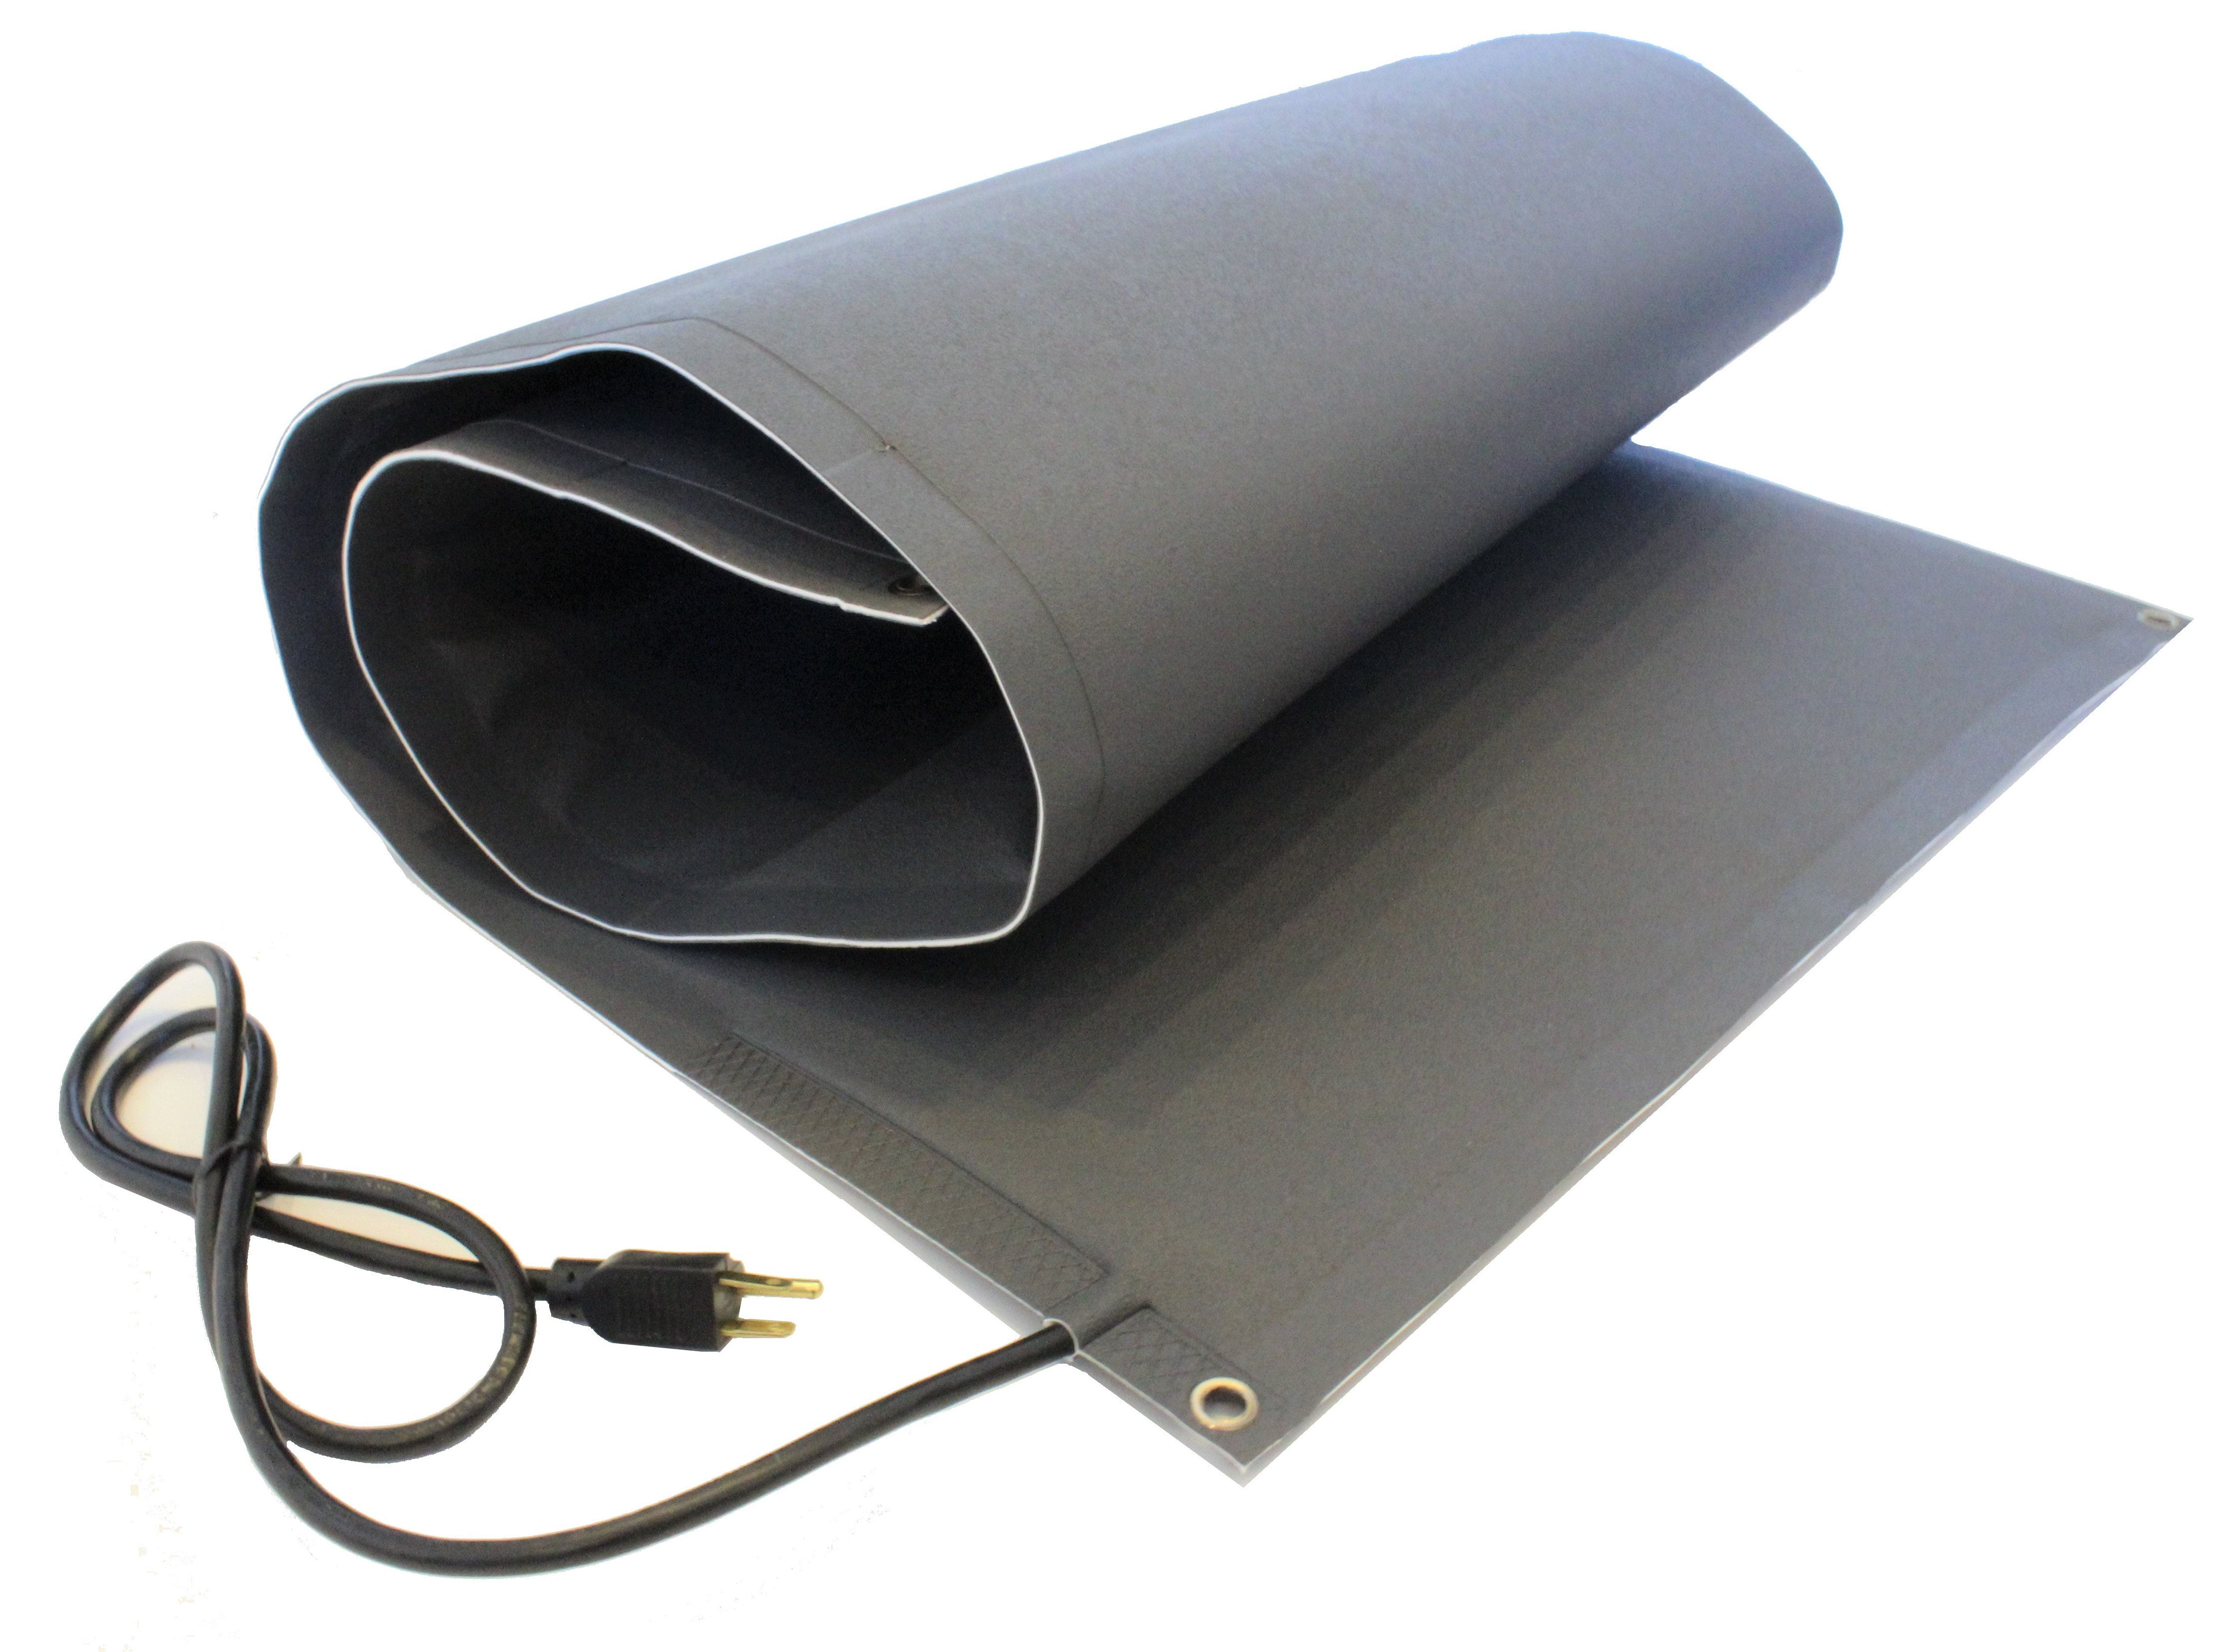 5 ft 5' ft. x 13 in. Roof Heating Systems RHS Snow Melting System UL components roof and valley snow melting mats mat melts 2 inches of snow per hour 5 ft. x 13 in. Sizes 5 feet x 13 inches buy factory direct, Color black